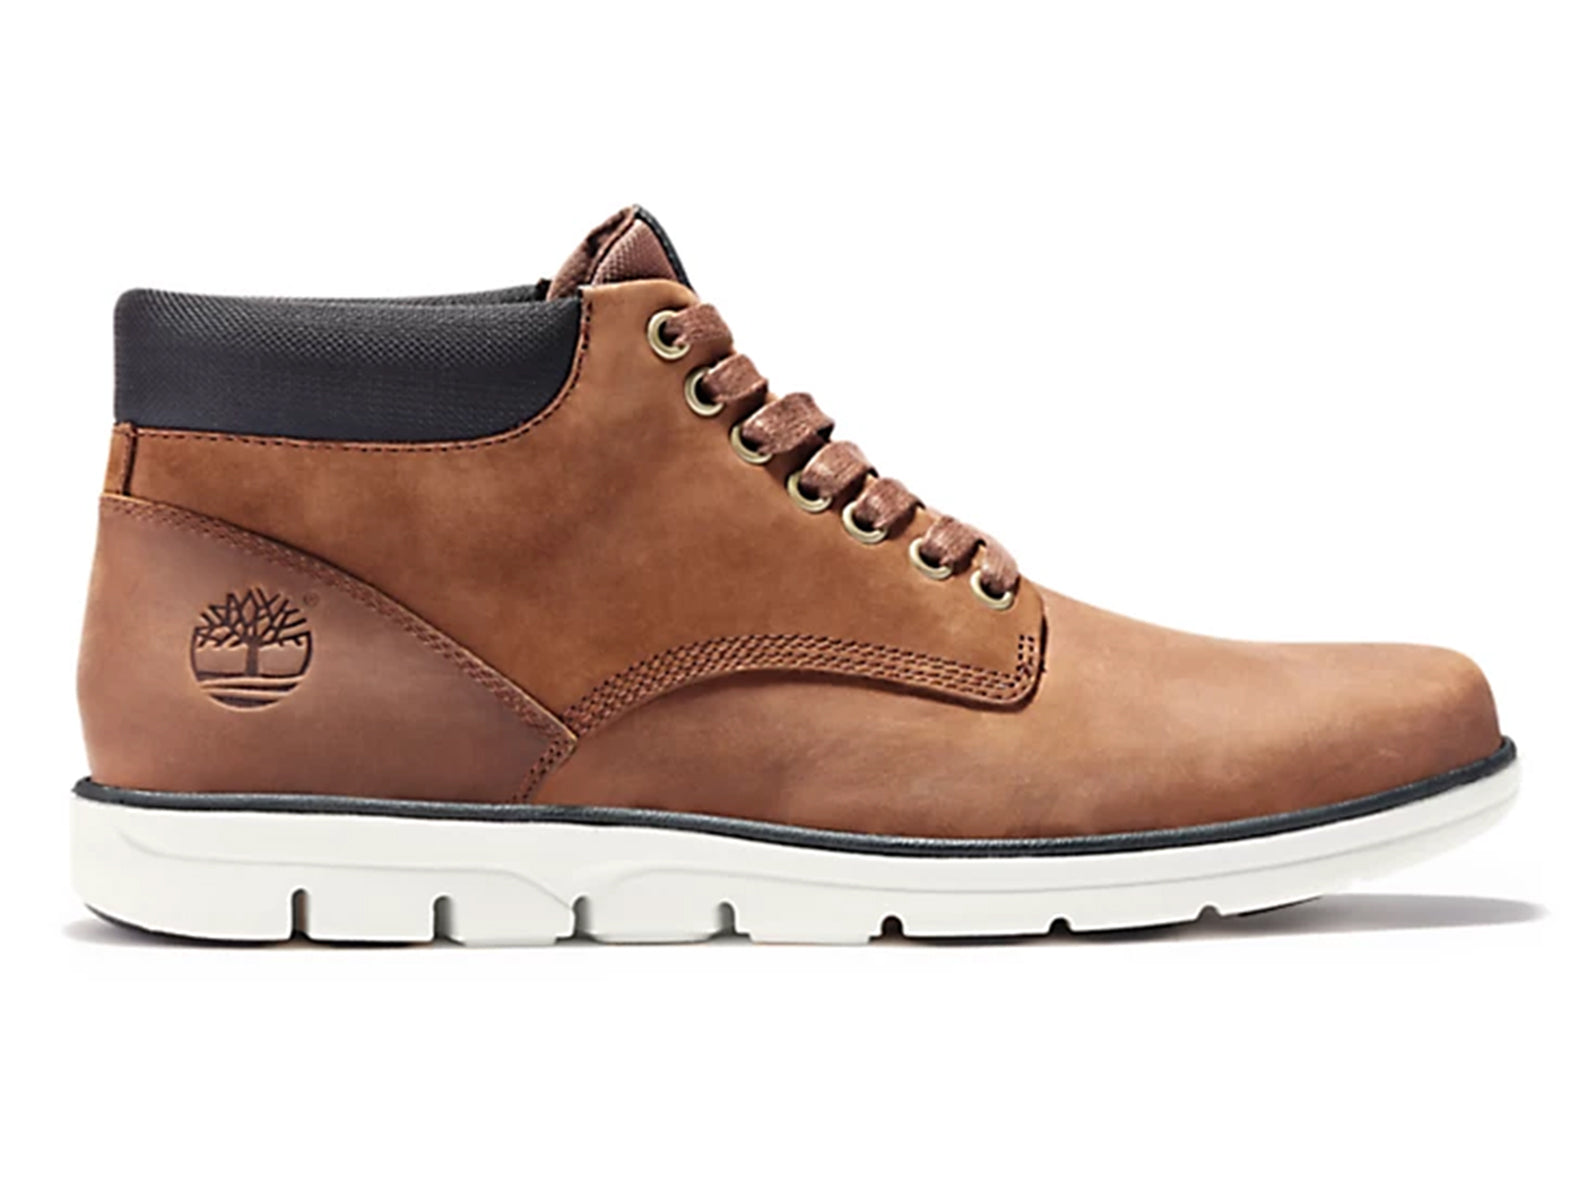 Timberland Bradstreet Chukka | Brown | Men's Boots Walsh Brothers Shoes